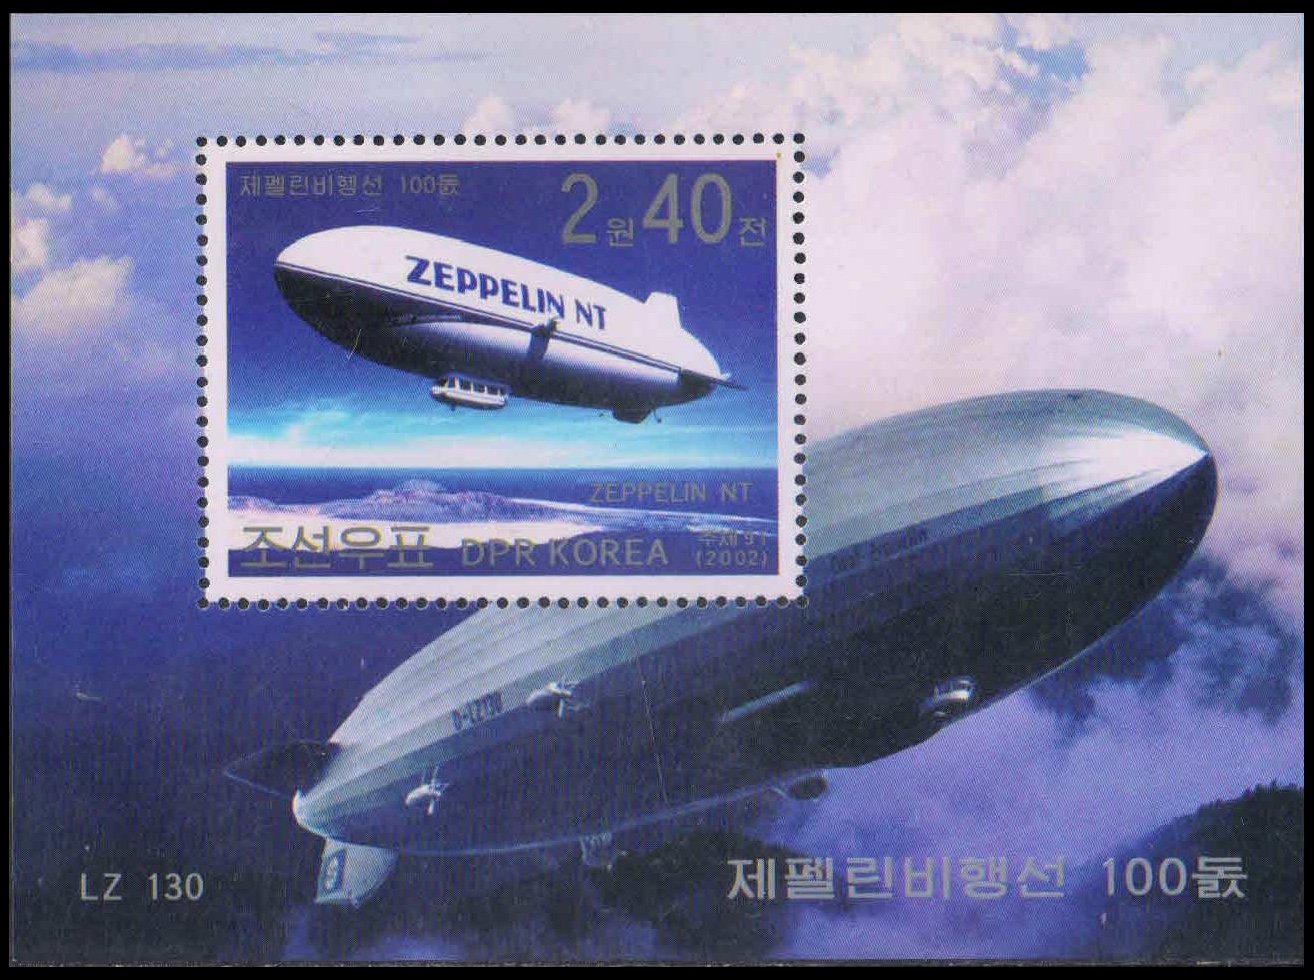 NORTH KOREA 2002-Zeppelin NT, Cent. of 1st Zeppelin Airship Flight, M/S, MNH, S.G. MS N 4193a